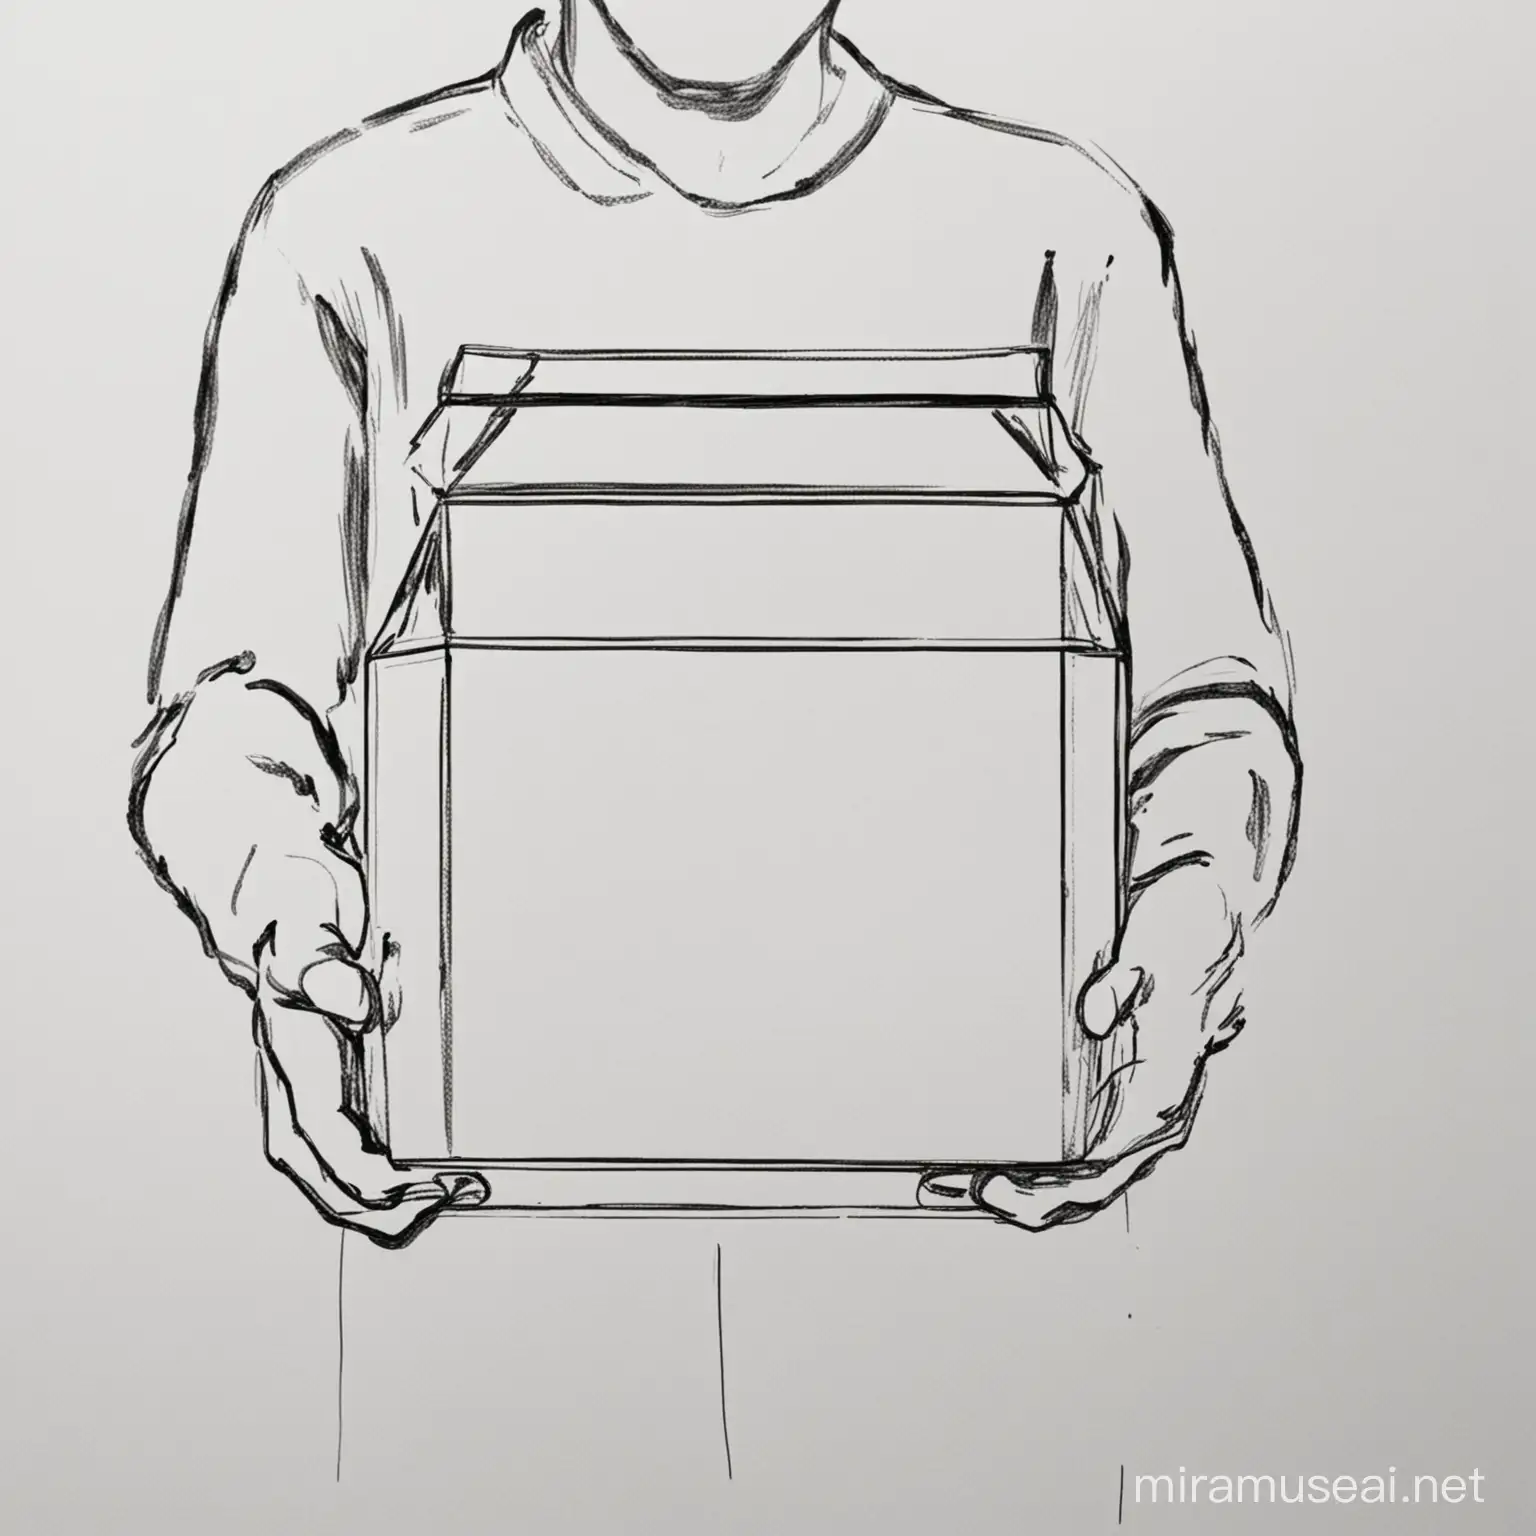 Sketch of a Person Holding a Box